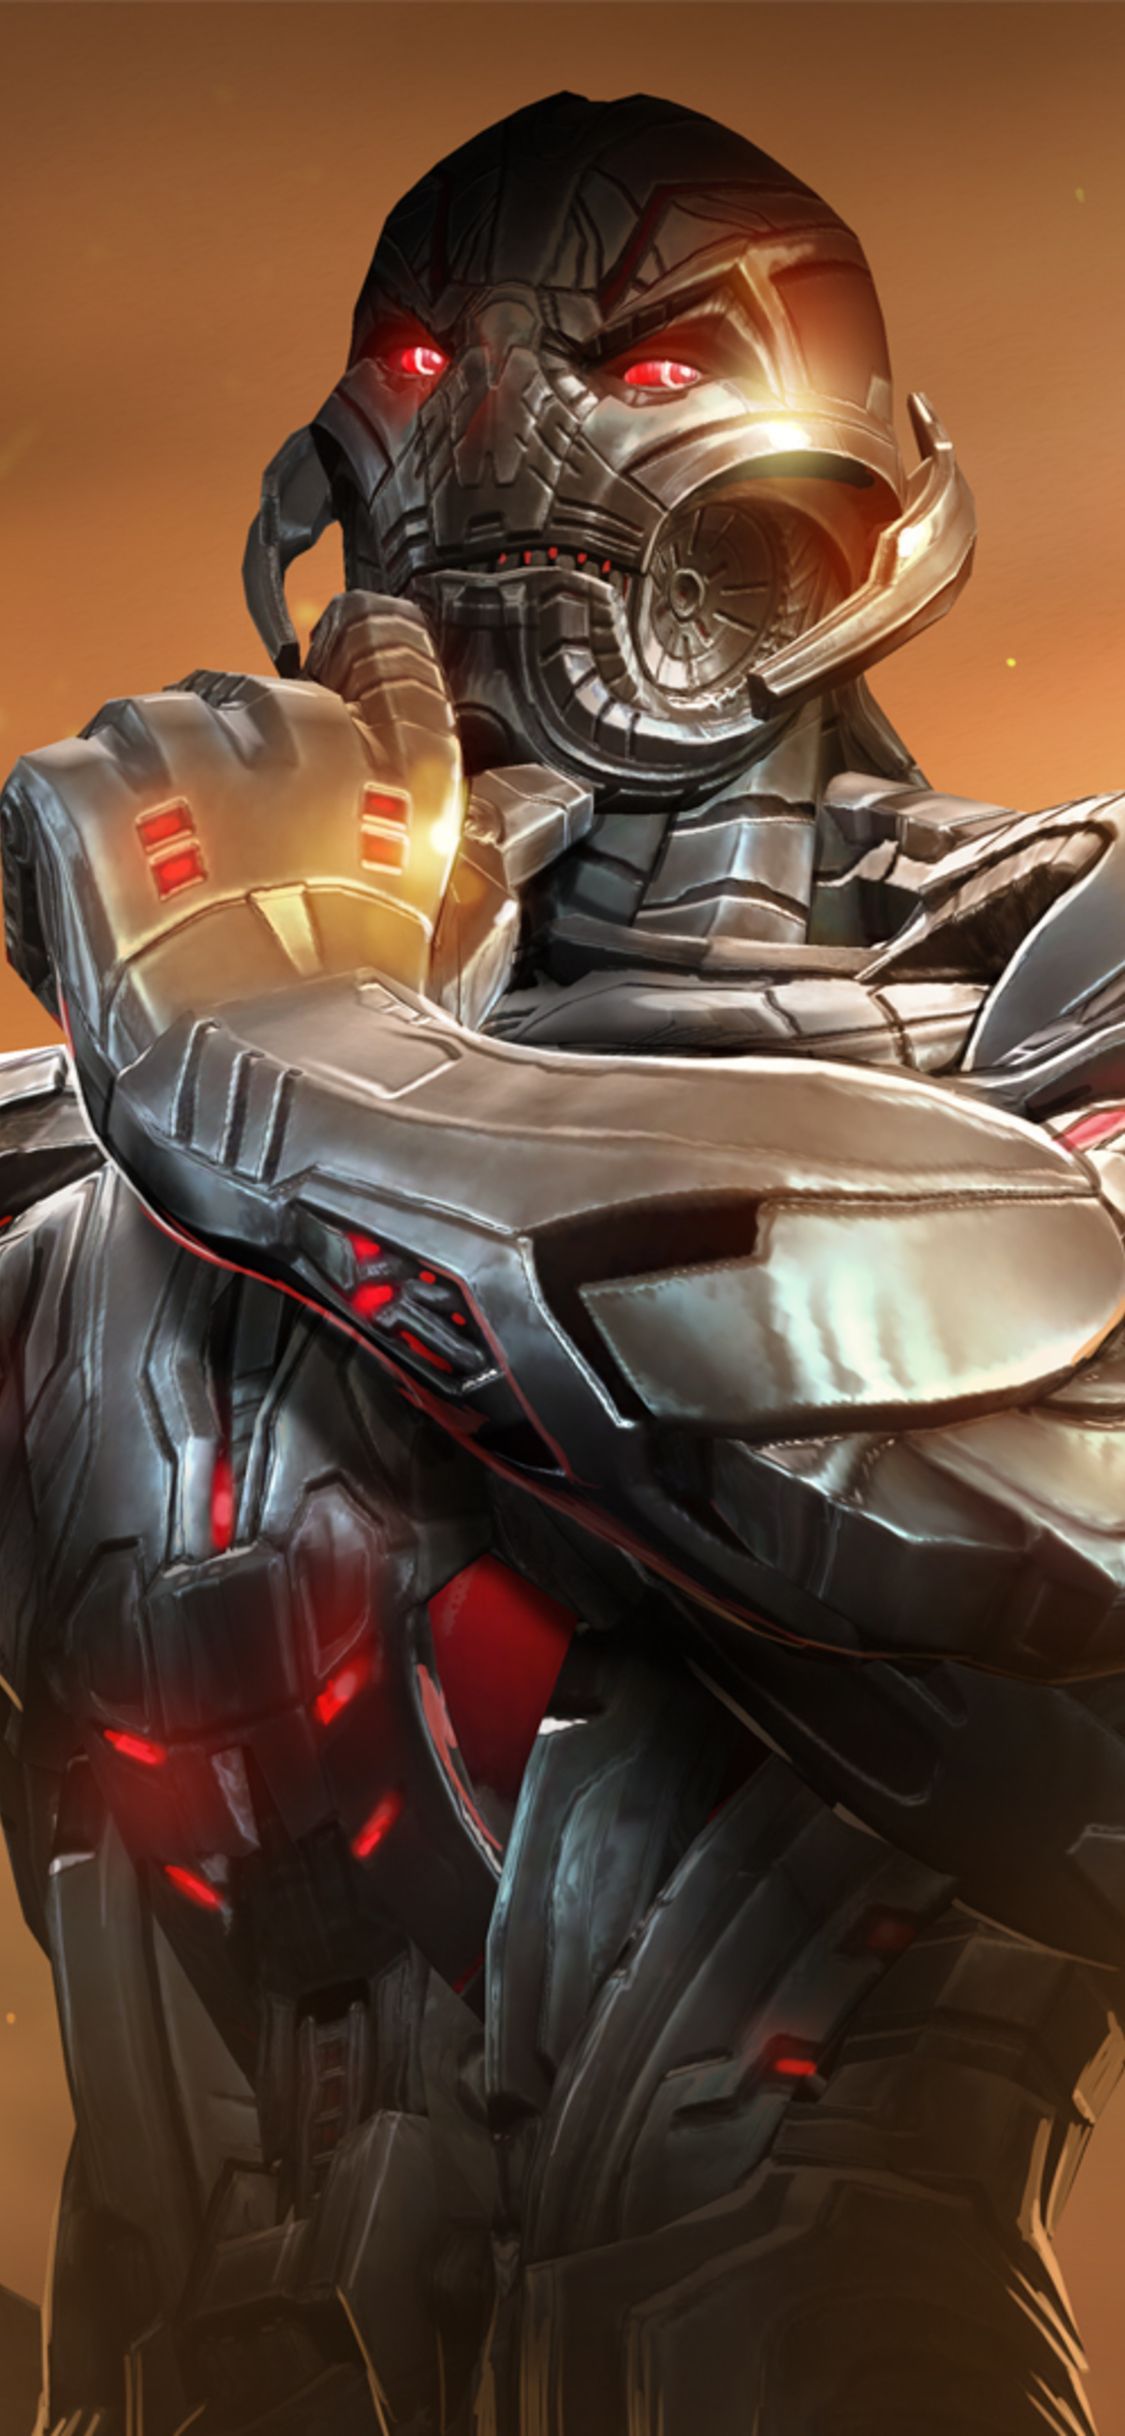 Ultron Marvel Contest Of Champions iPhone XS, iPhone iPhone X HD 4k Wallpaper, Image, Back. Marvel villains, Ultron marvel, Marvel superhero posters